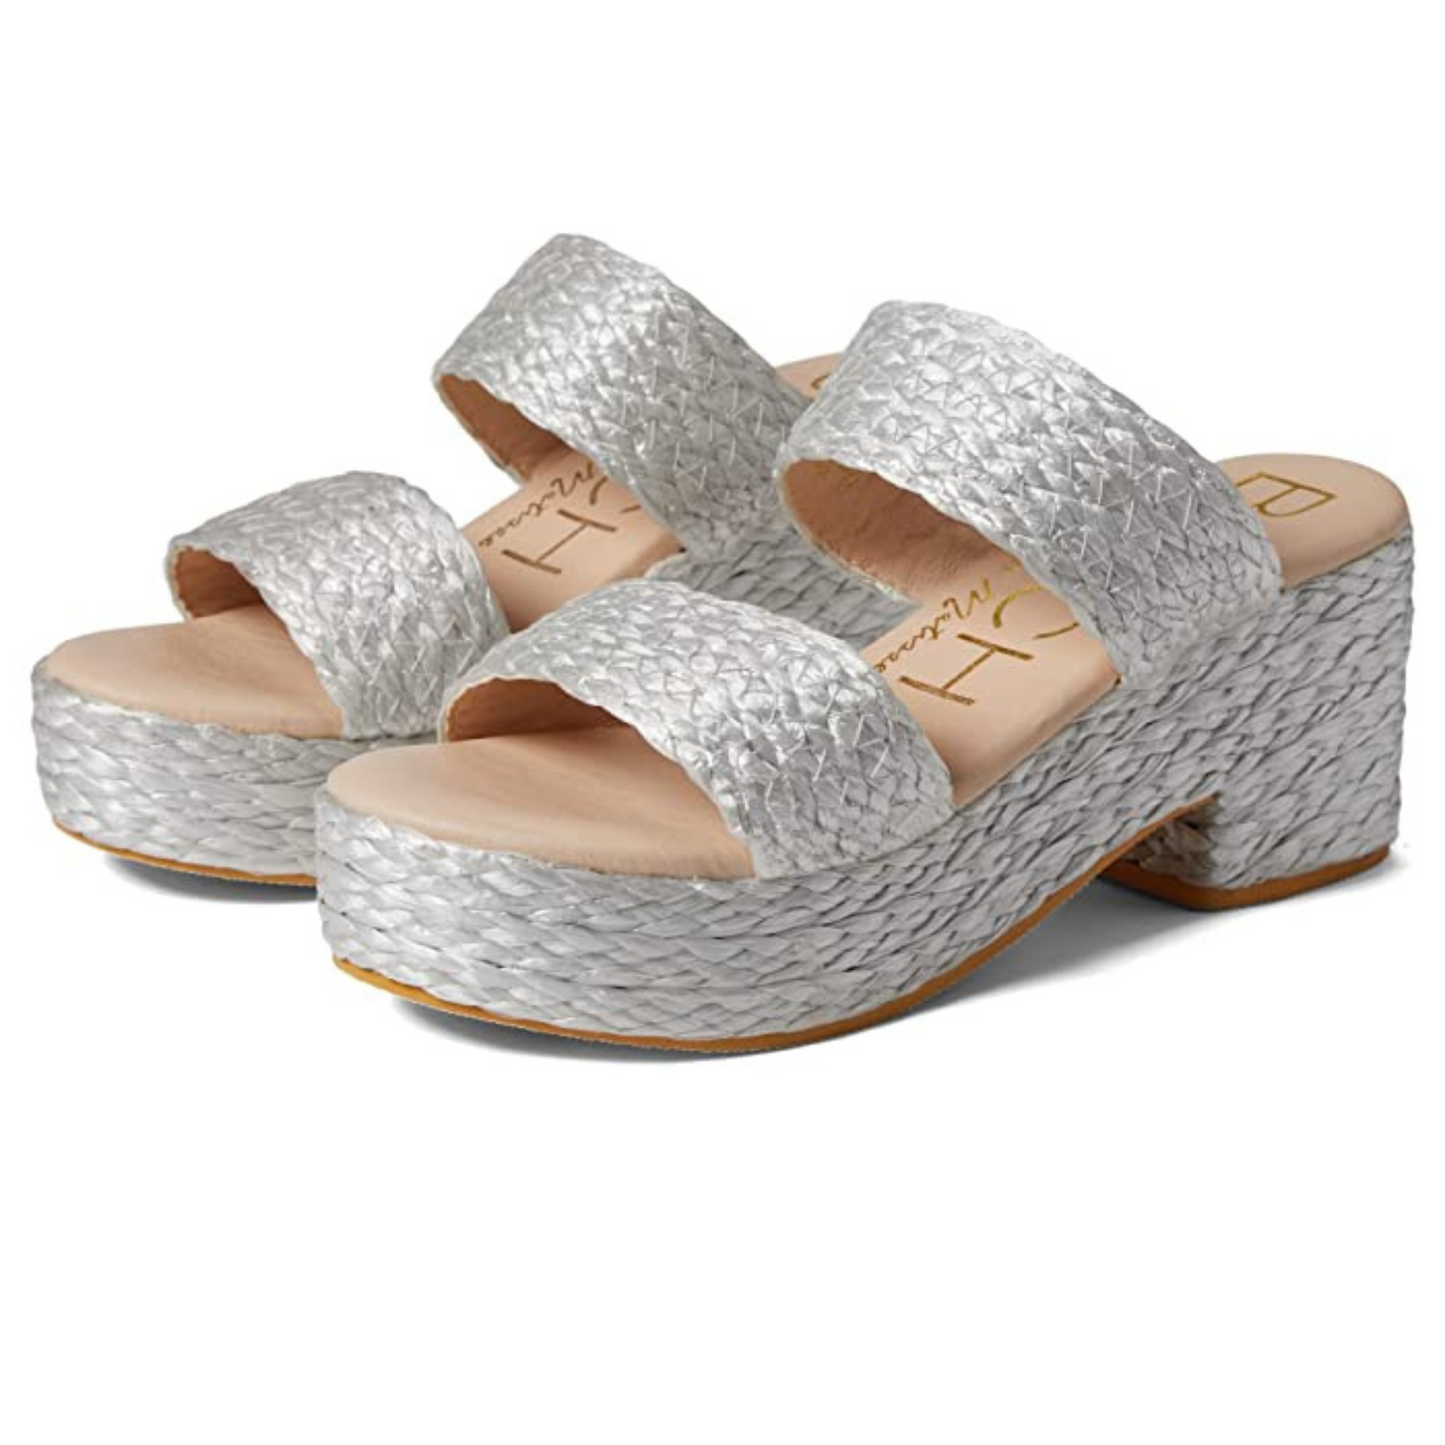 Look fashionable and put your best foot forward with Ocean Ave. This stylish sandal features a silver color, wedge design, and a color-coordinated braided design for added flair. High-quality construction ensures a comfortable fit that lasts.